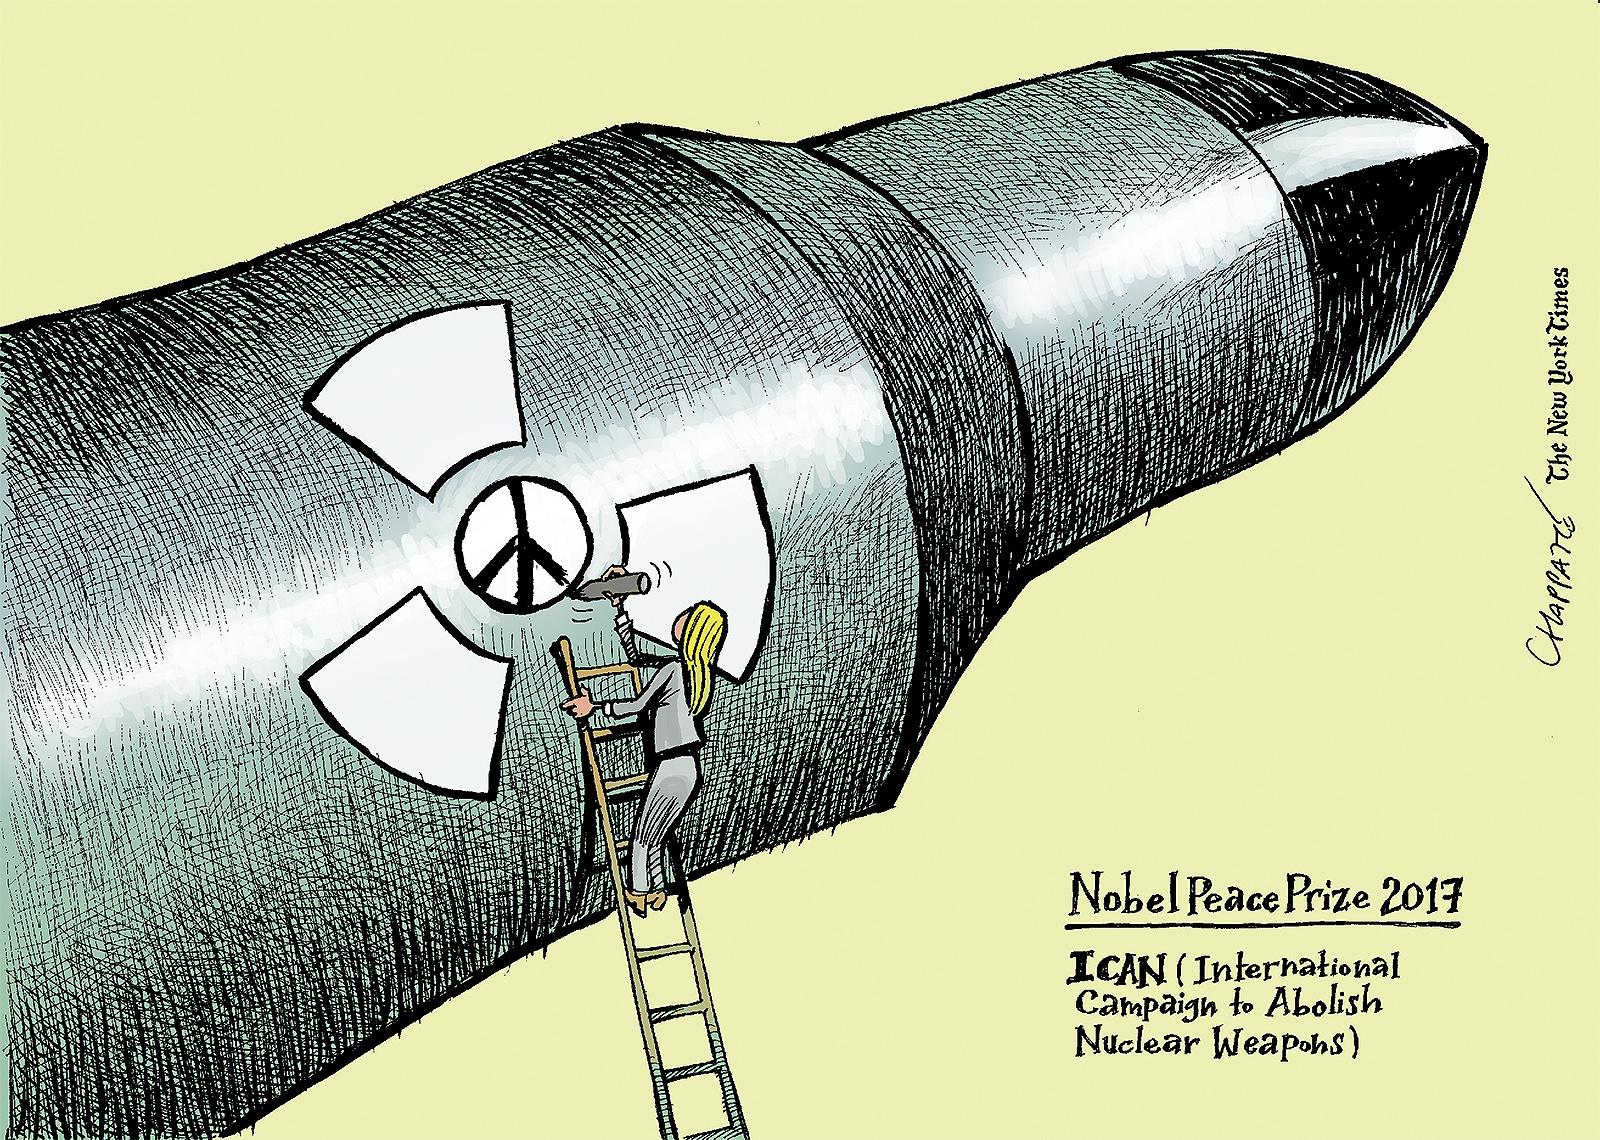 A world without nukes?